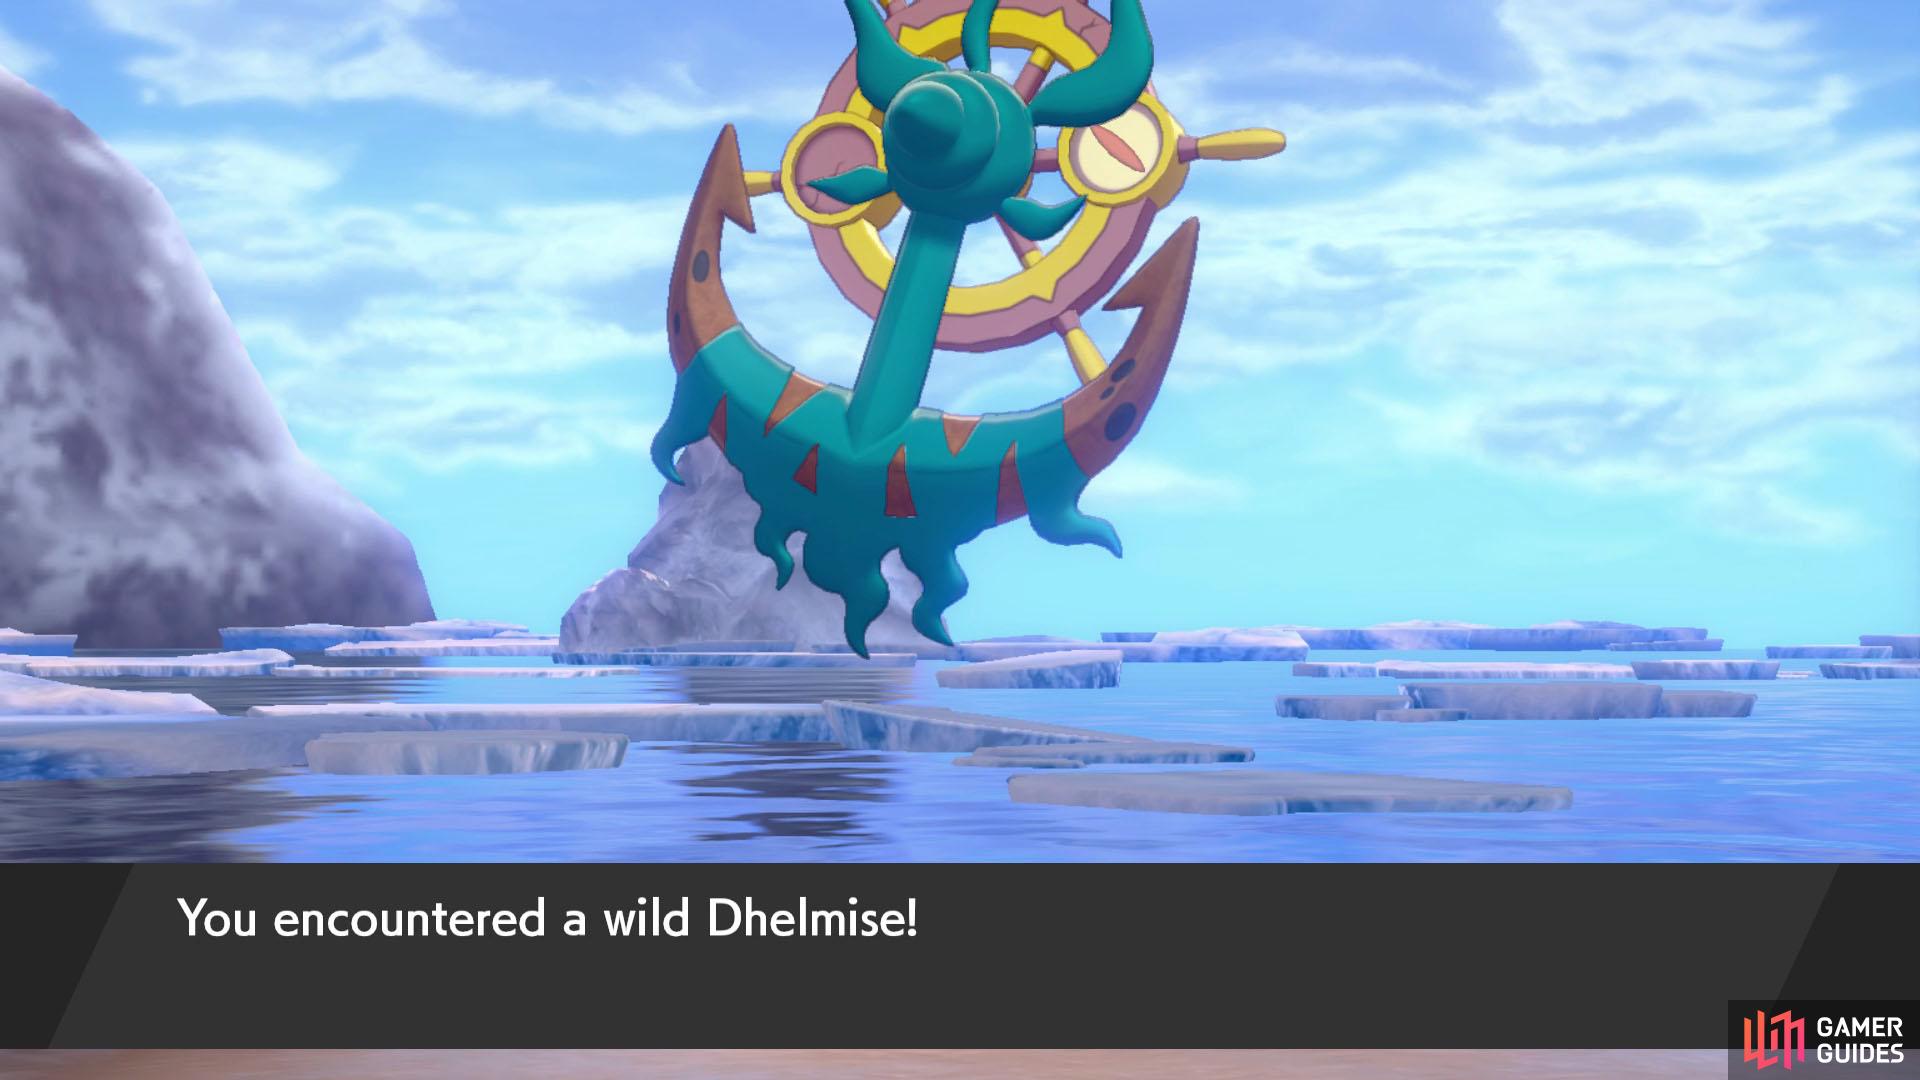 Dhelmise's Ability boosts the power of its Steel-type moves by 50%, effectively giving it STAB.